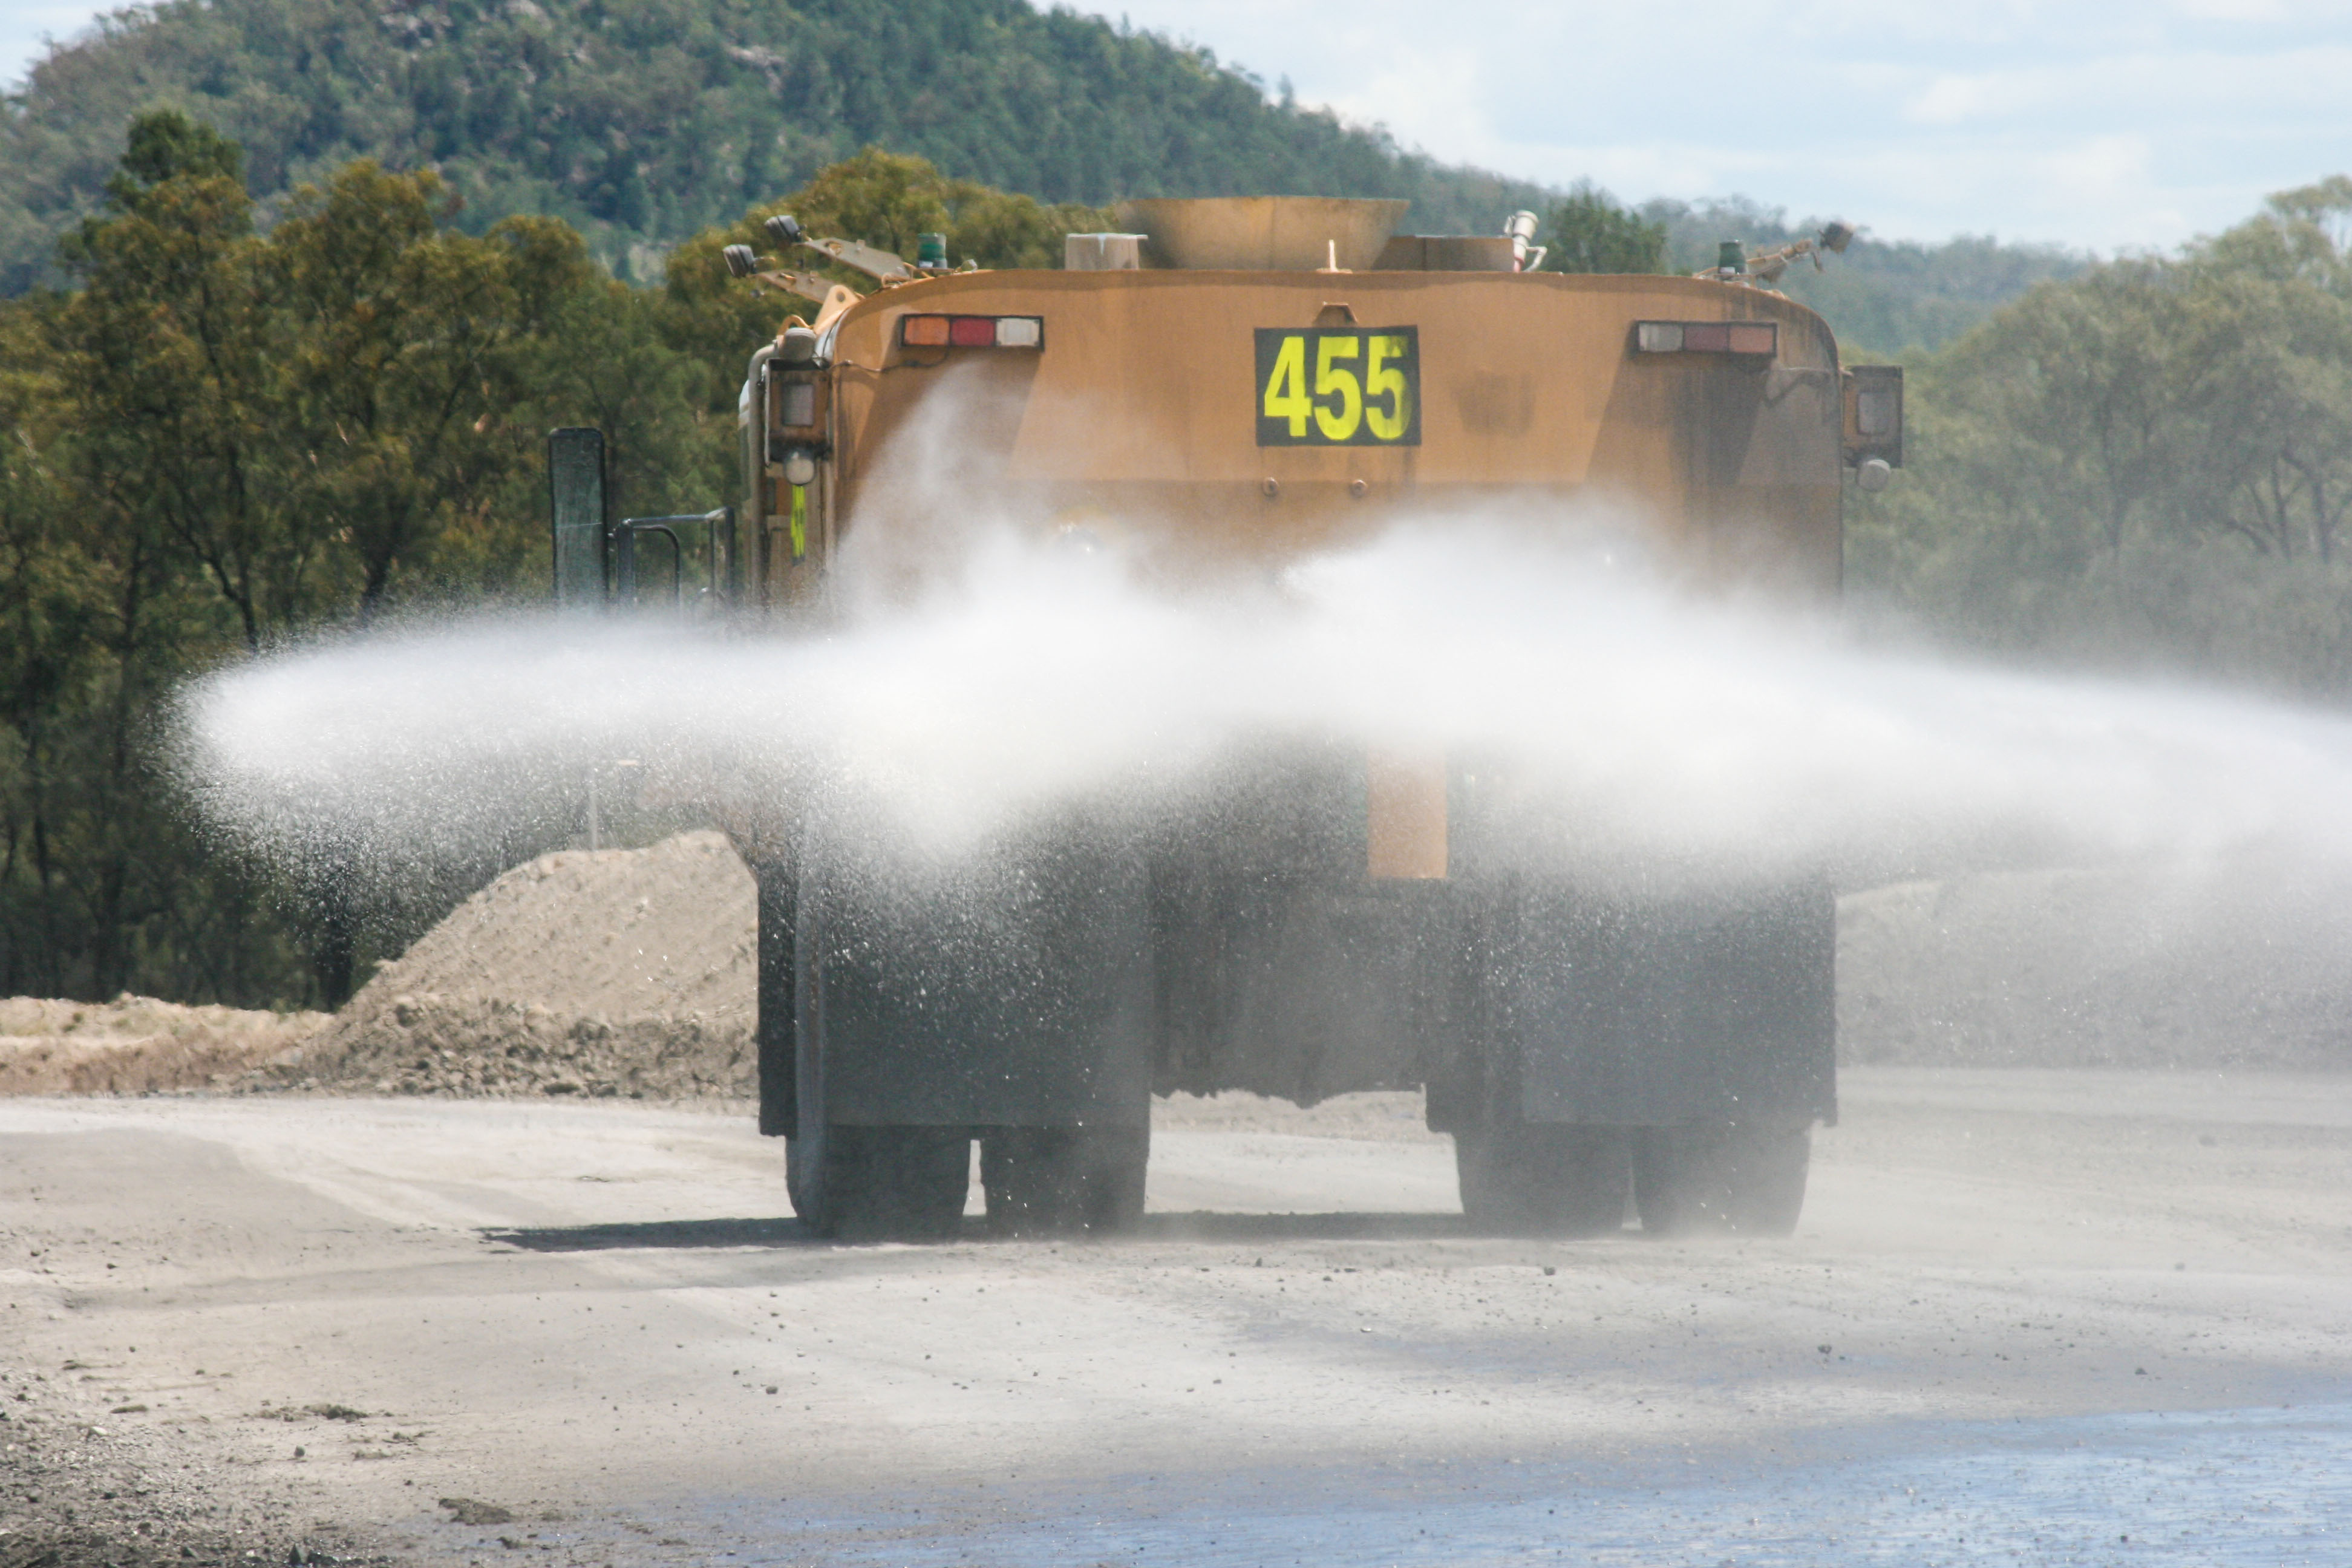 Overwatering haul roads in coal mines can often result in a hazardous work environment. Here's how to create a more durable, safer road surface: 